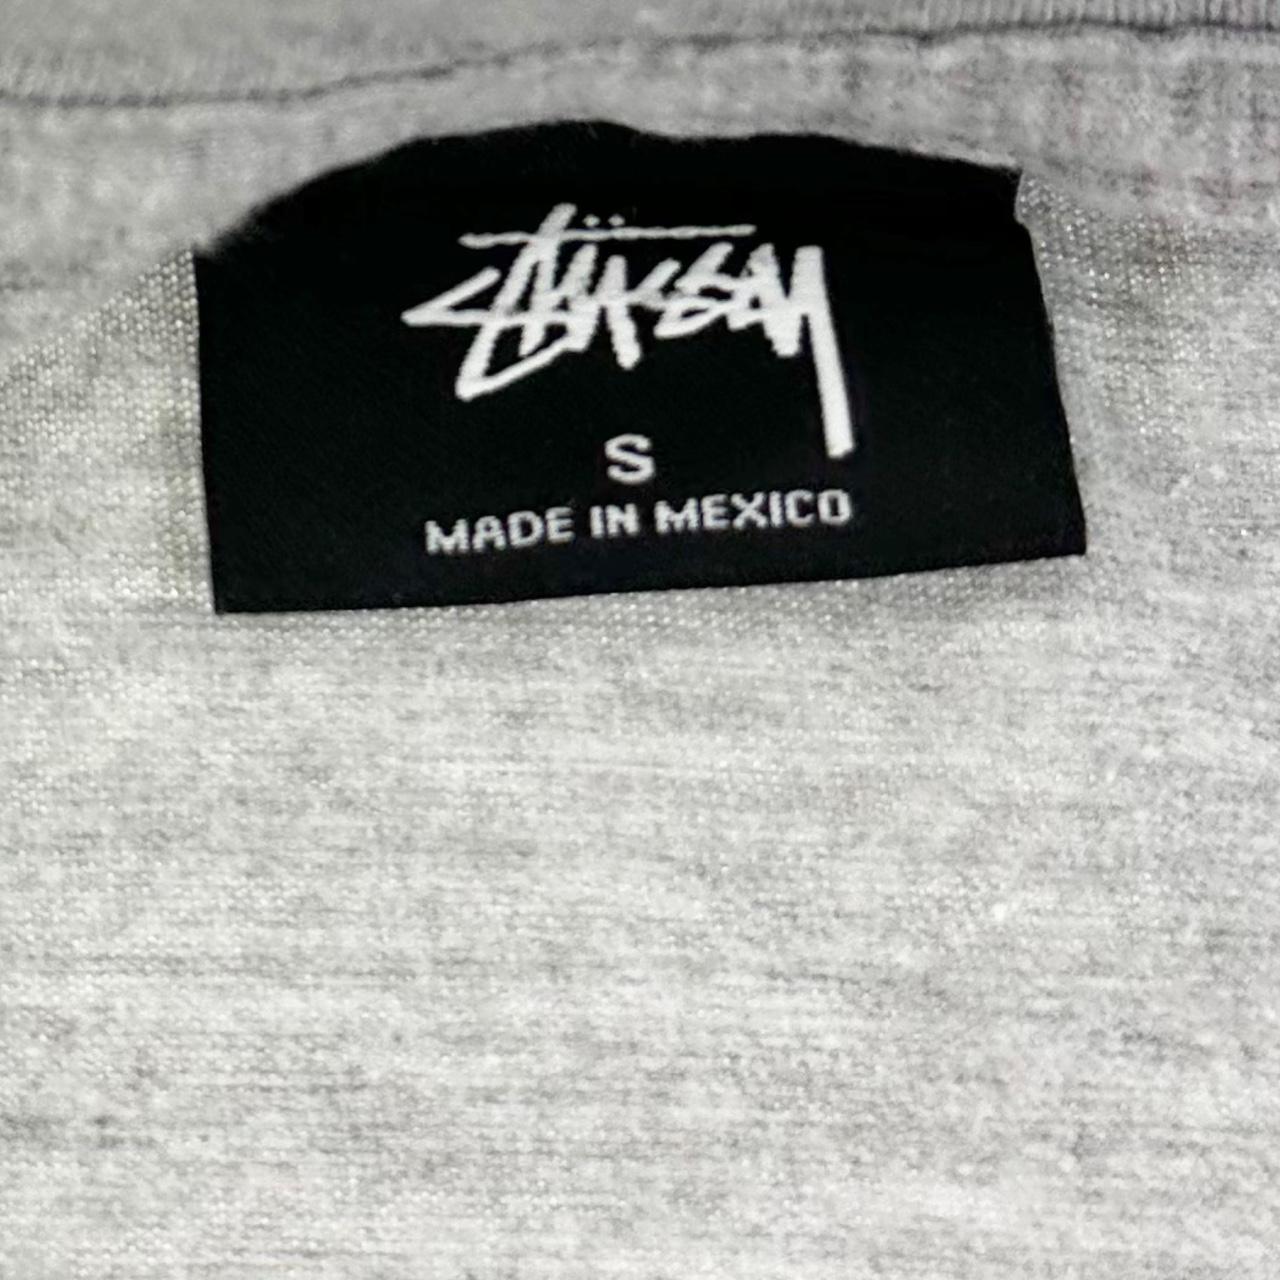 Stussy Fade T Shirt Size S - Known Source